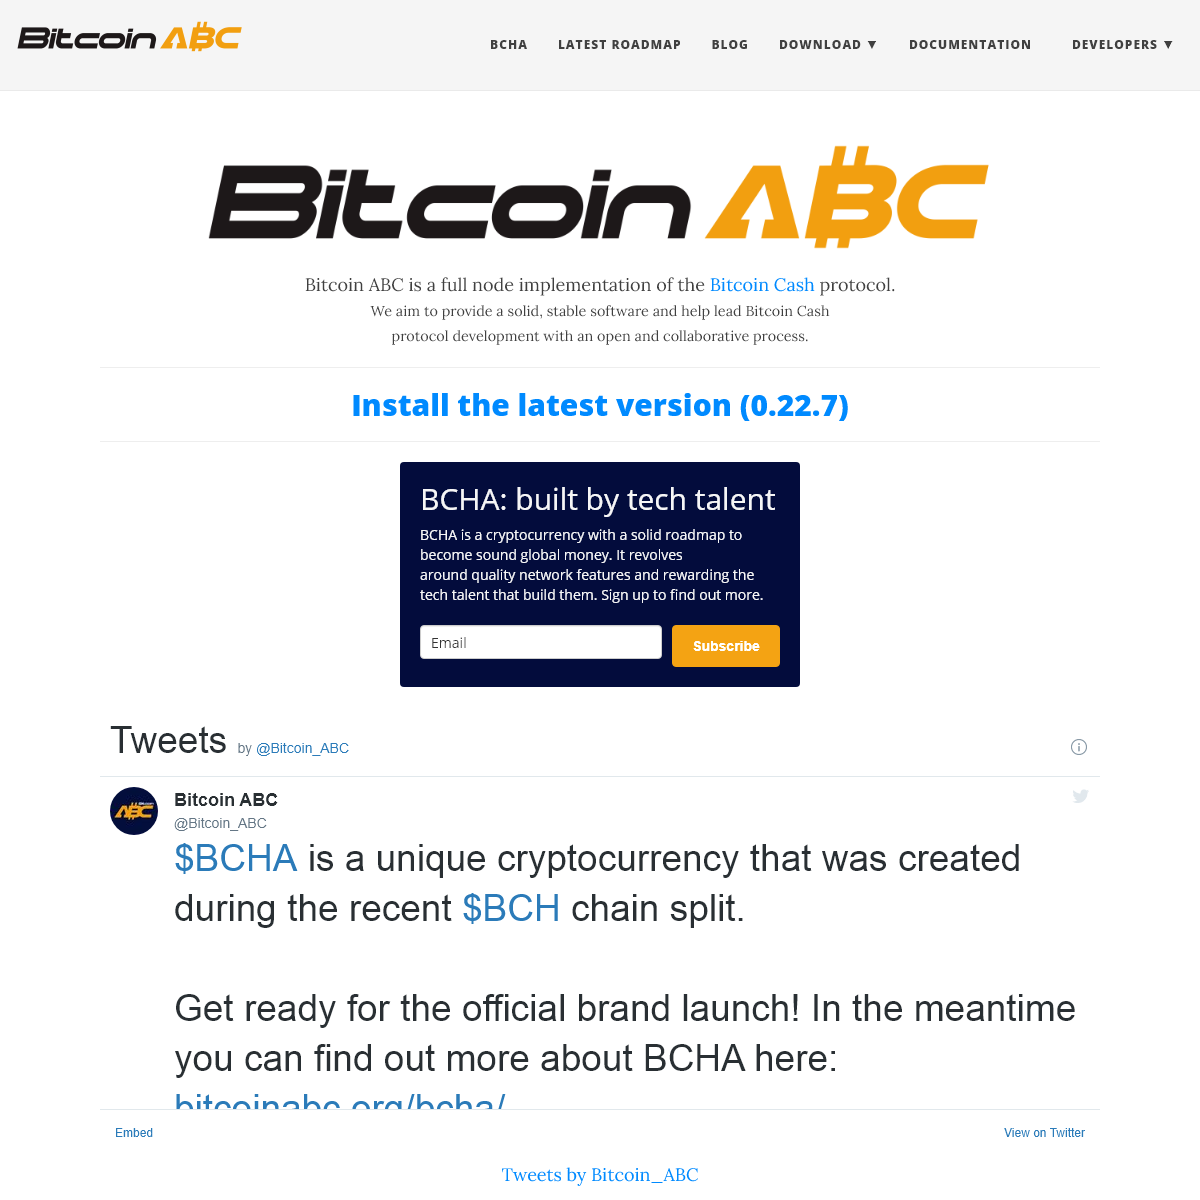 A complete backup of bitcoinabc.org